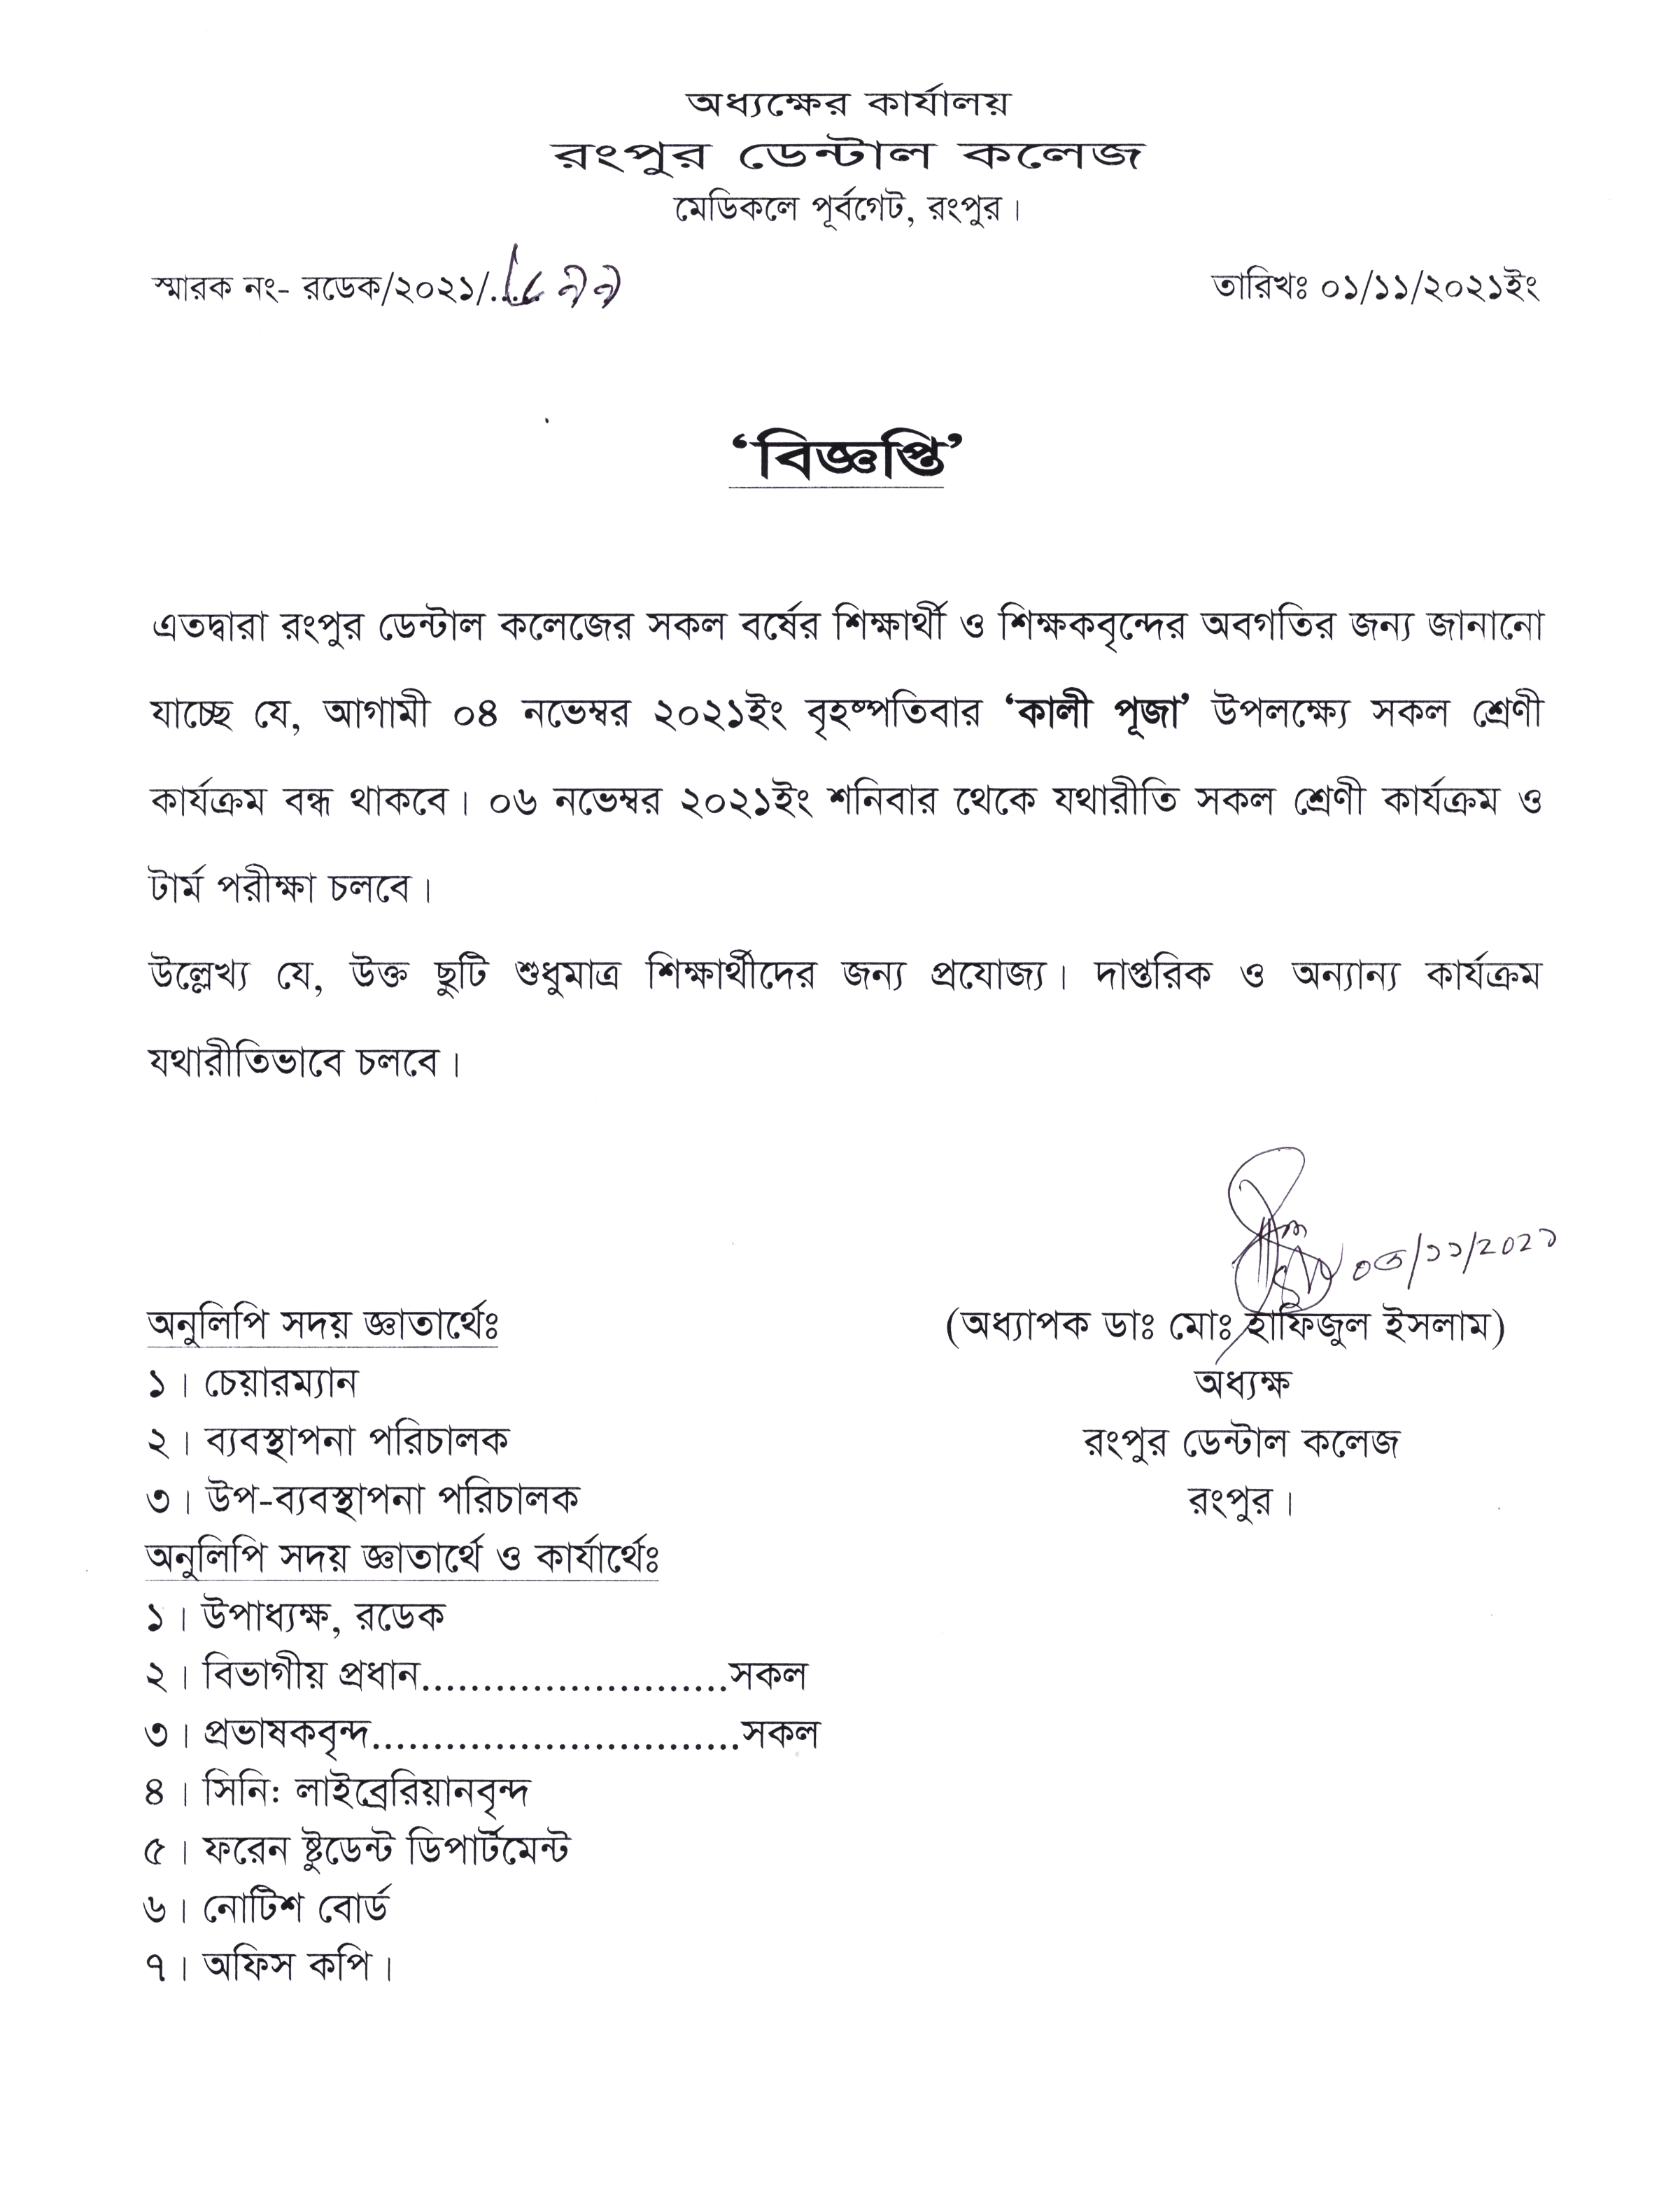 Holiday Notice of Kali Puja by RDC, 2021